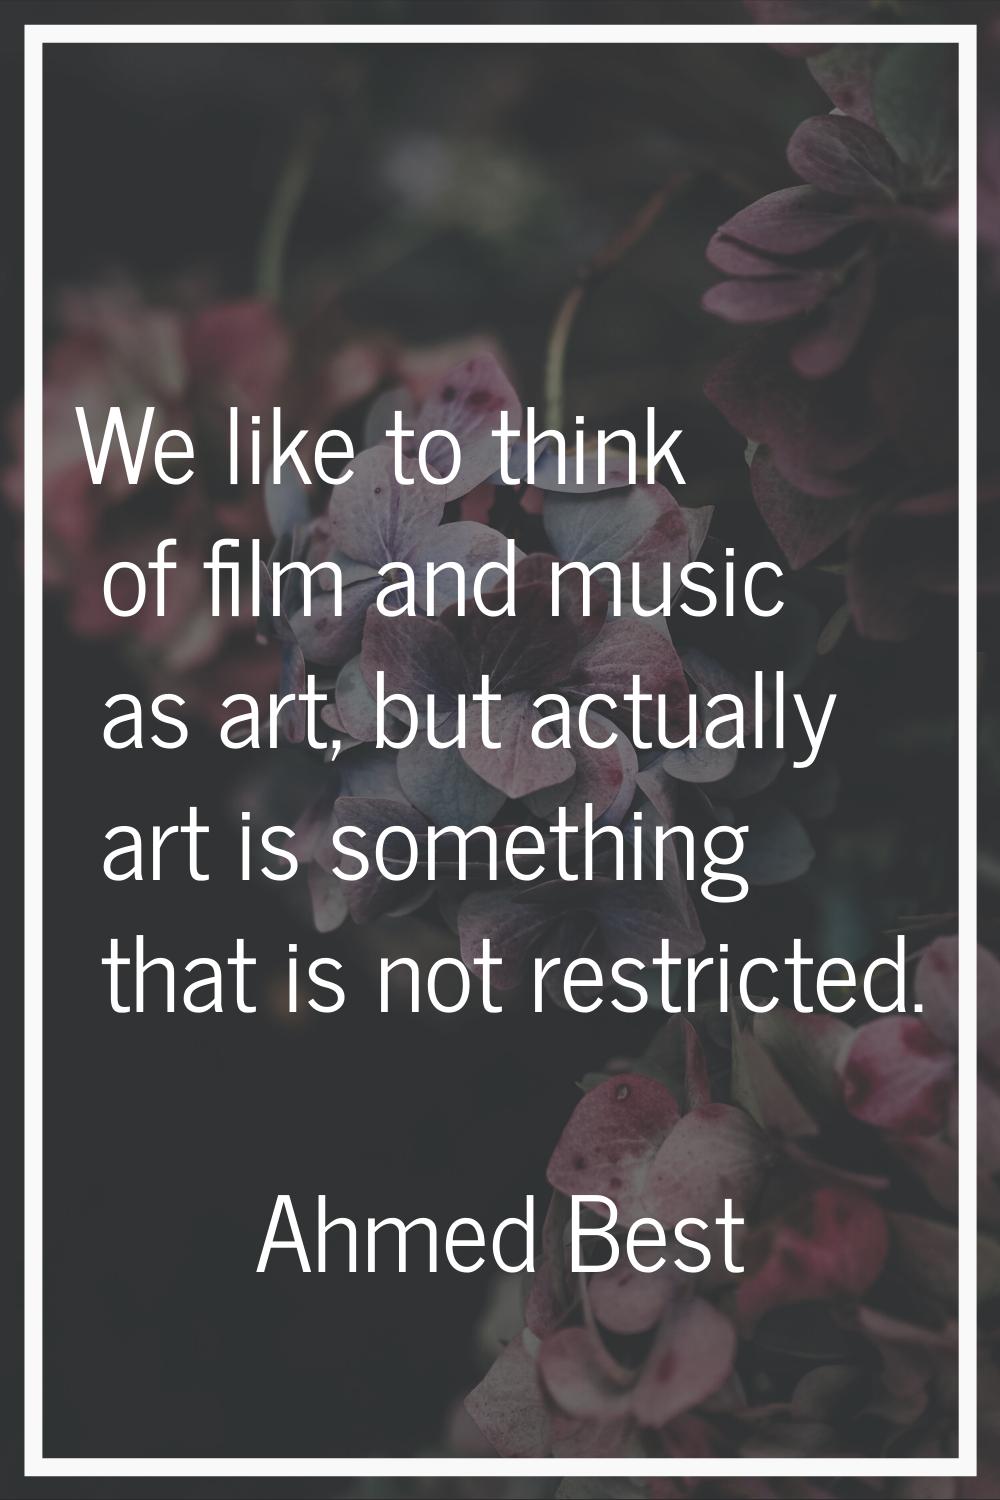 We like to think of film and music as art, but actually art is something that is not restricted.